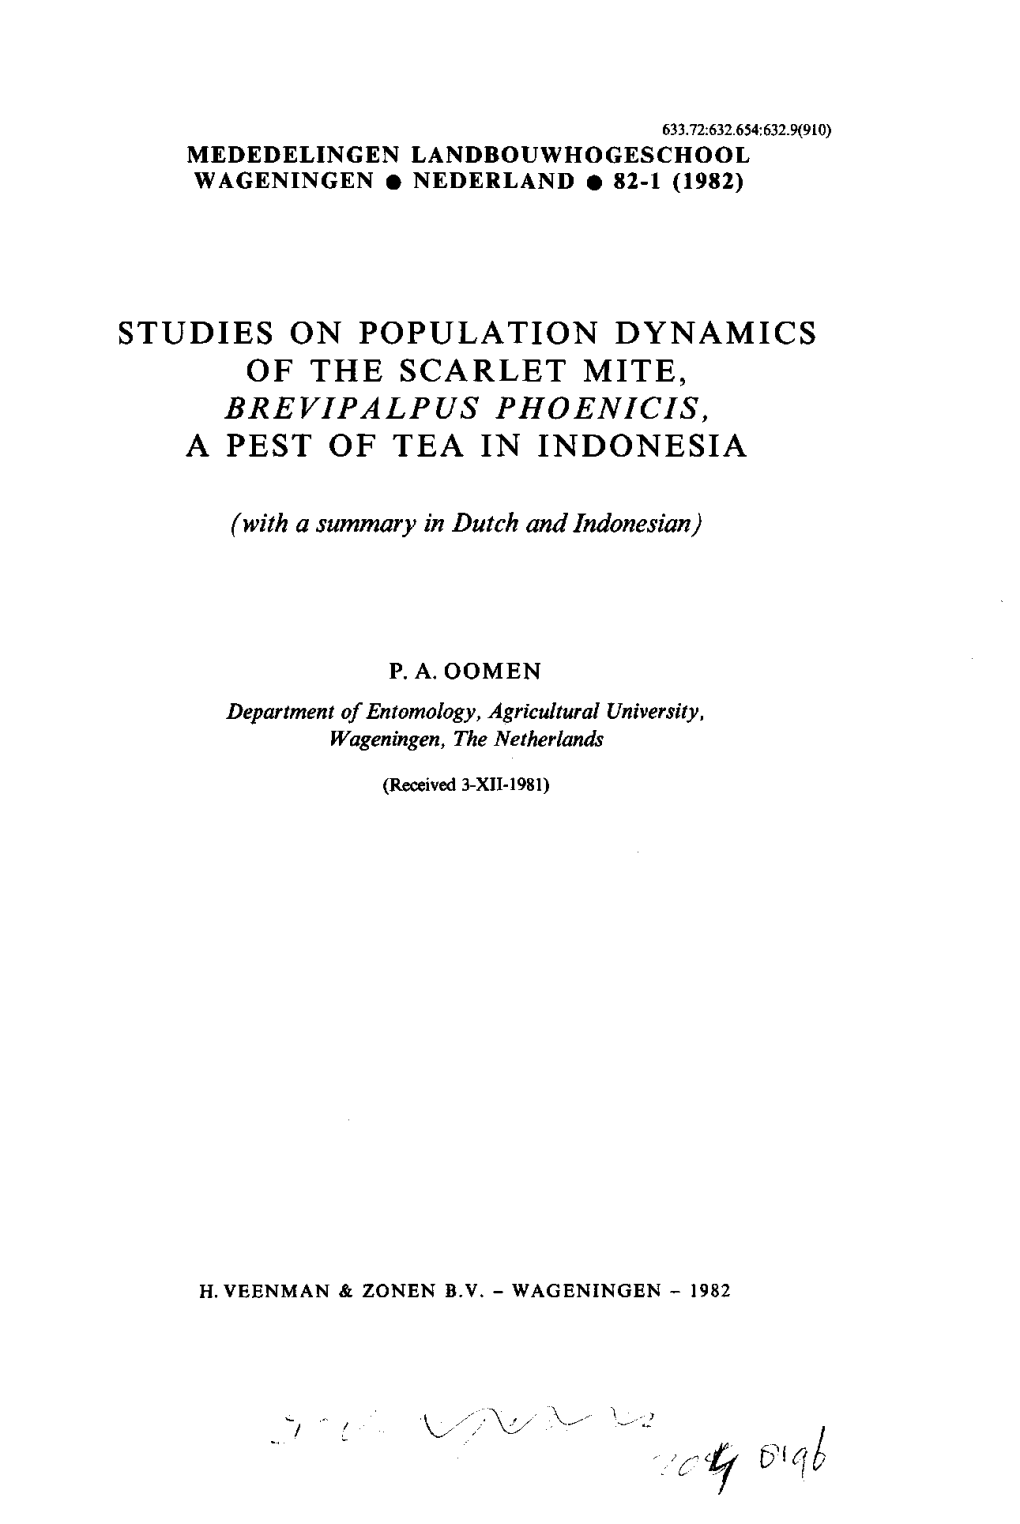 Studies on Population Dynamics of the Scarlet Mite, Brevipalpus Phoenicis, a Pest of Tea in Indonesia